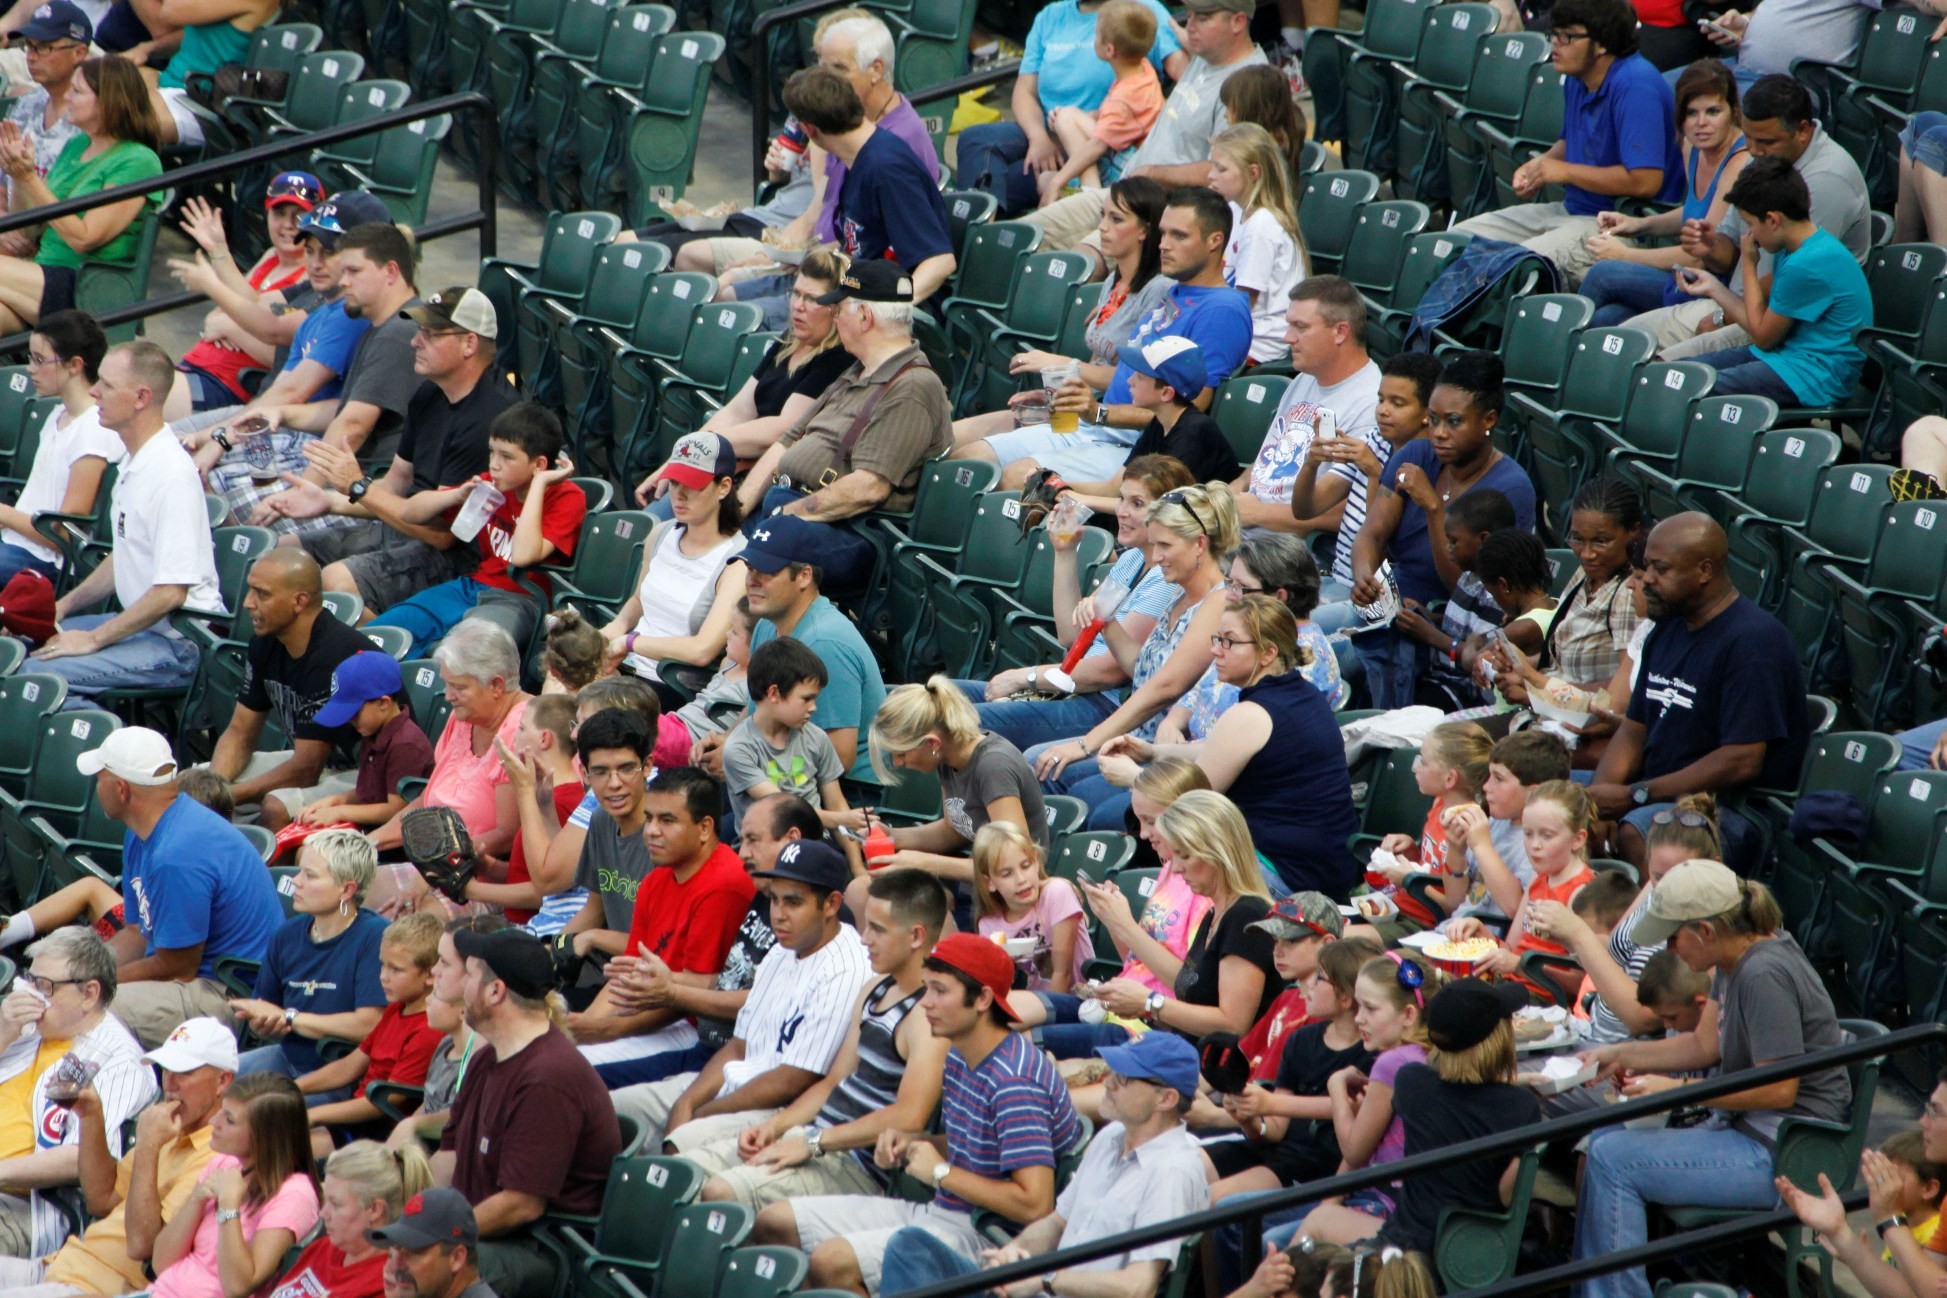 Round Rock Express announces theme nights